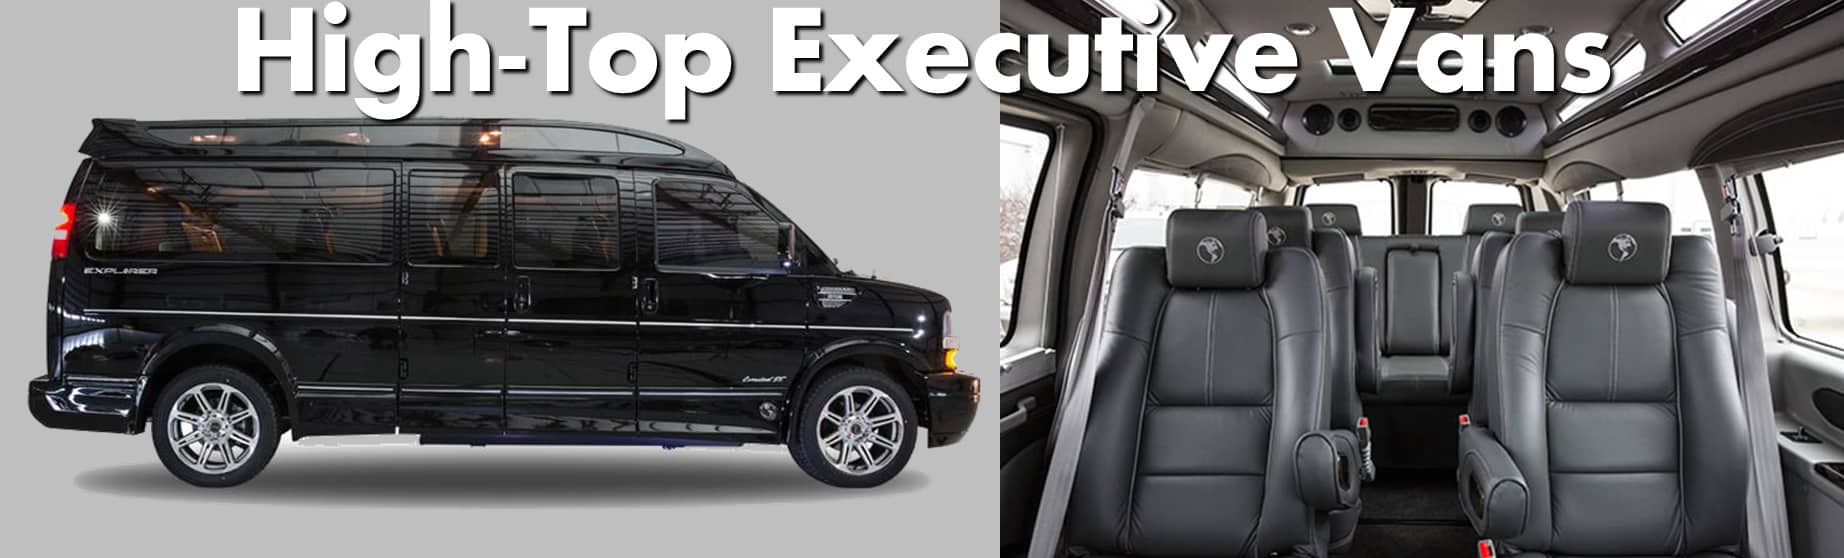 Best Twin Cities Minneapolis Executive High-Top Vans and Shuttle Buses Transportation Services Photos - Minneapolis St Paul - Twin Cities Area - Aspen Limo and Car Services - Vehicles Photos